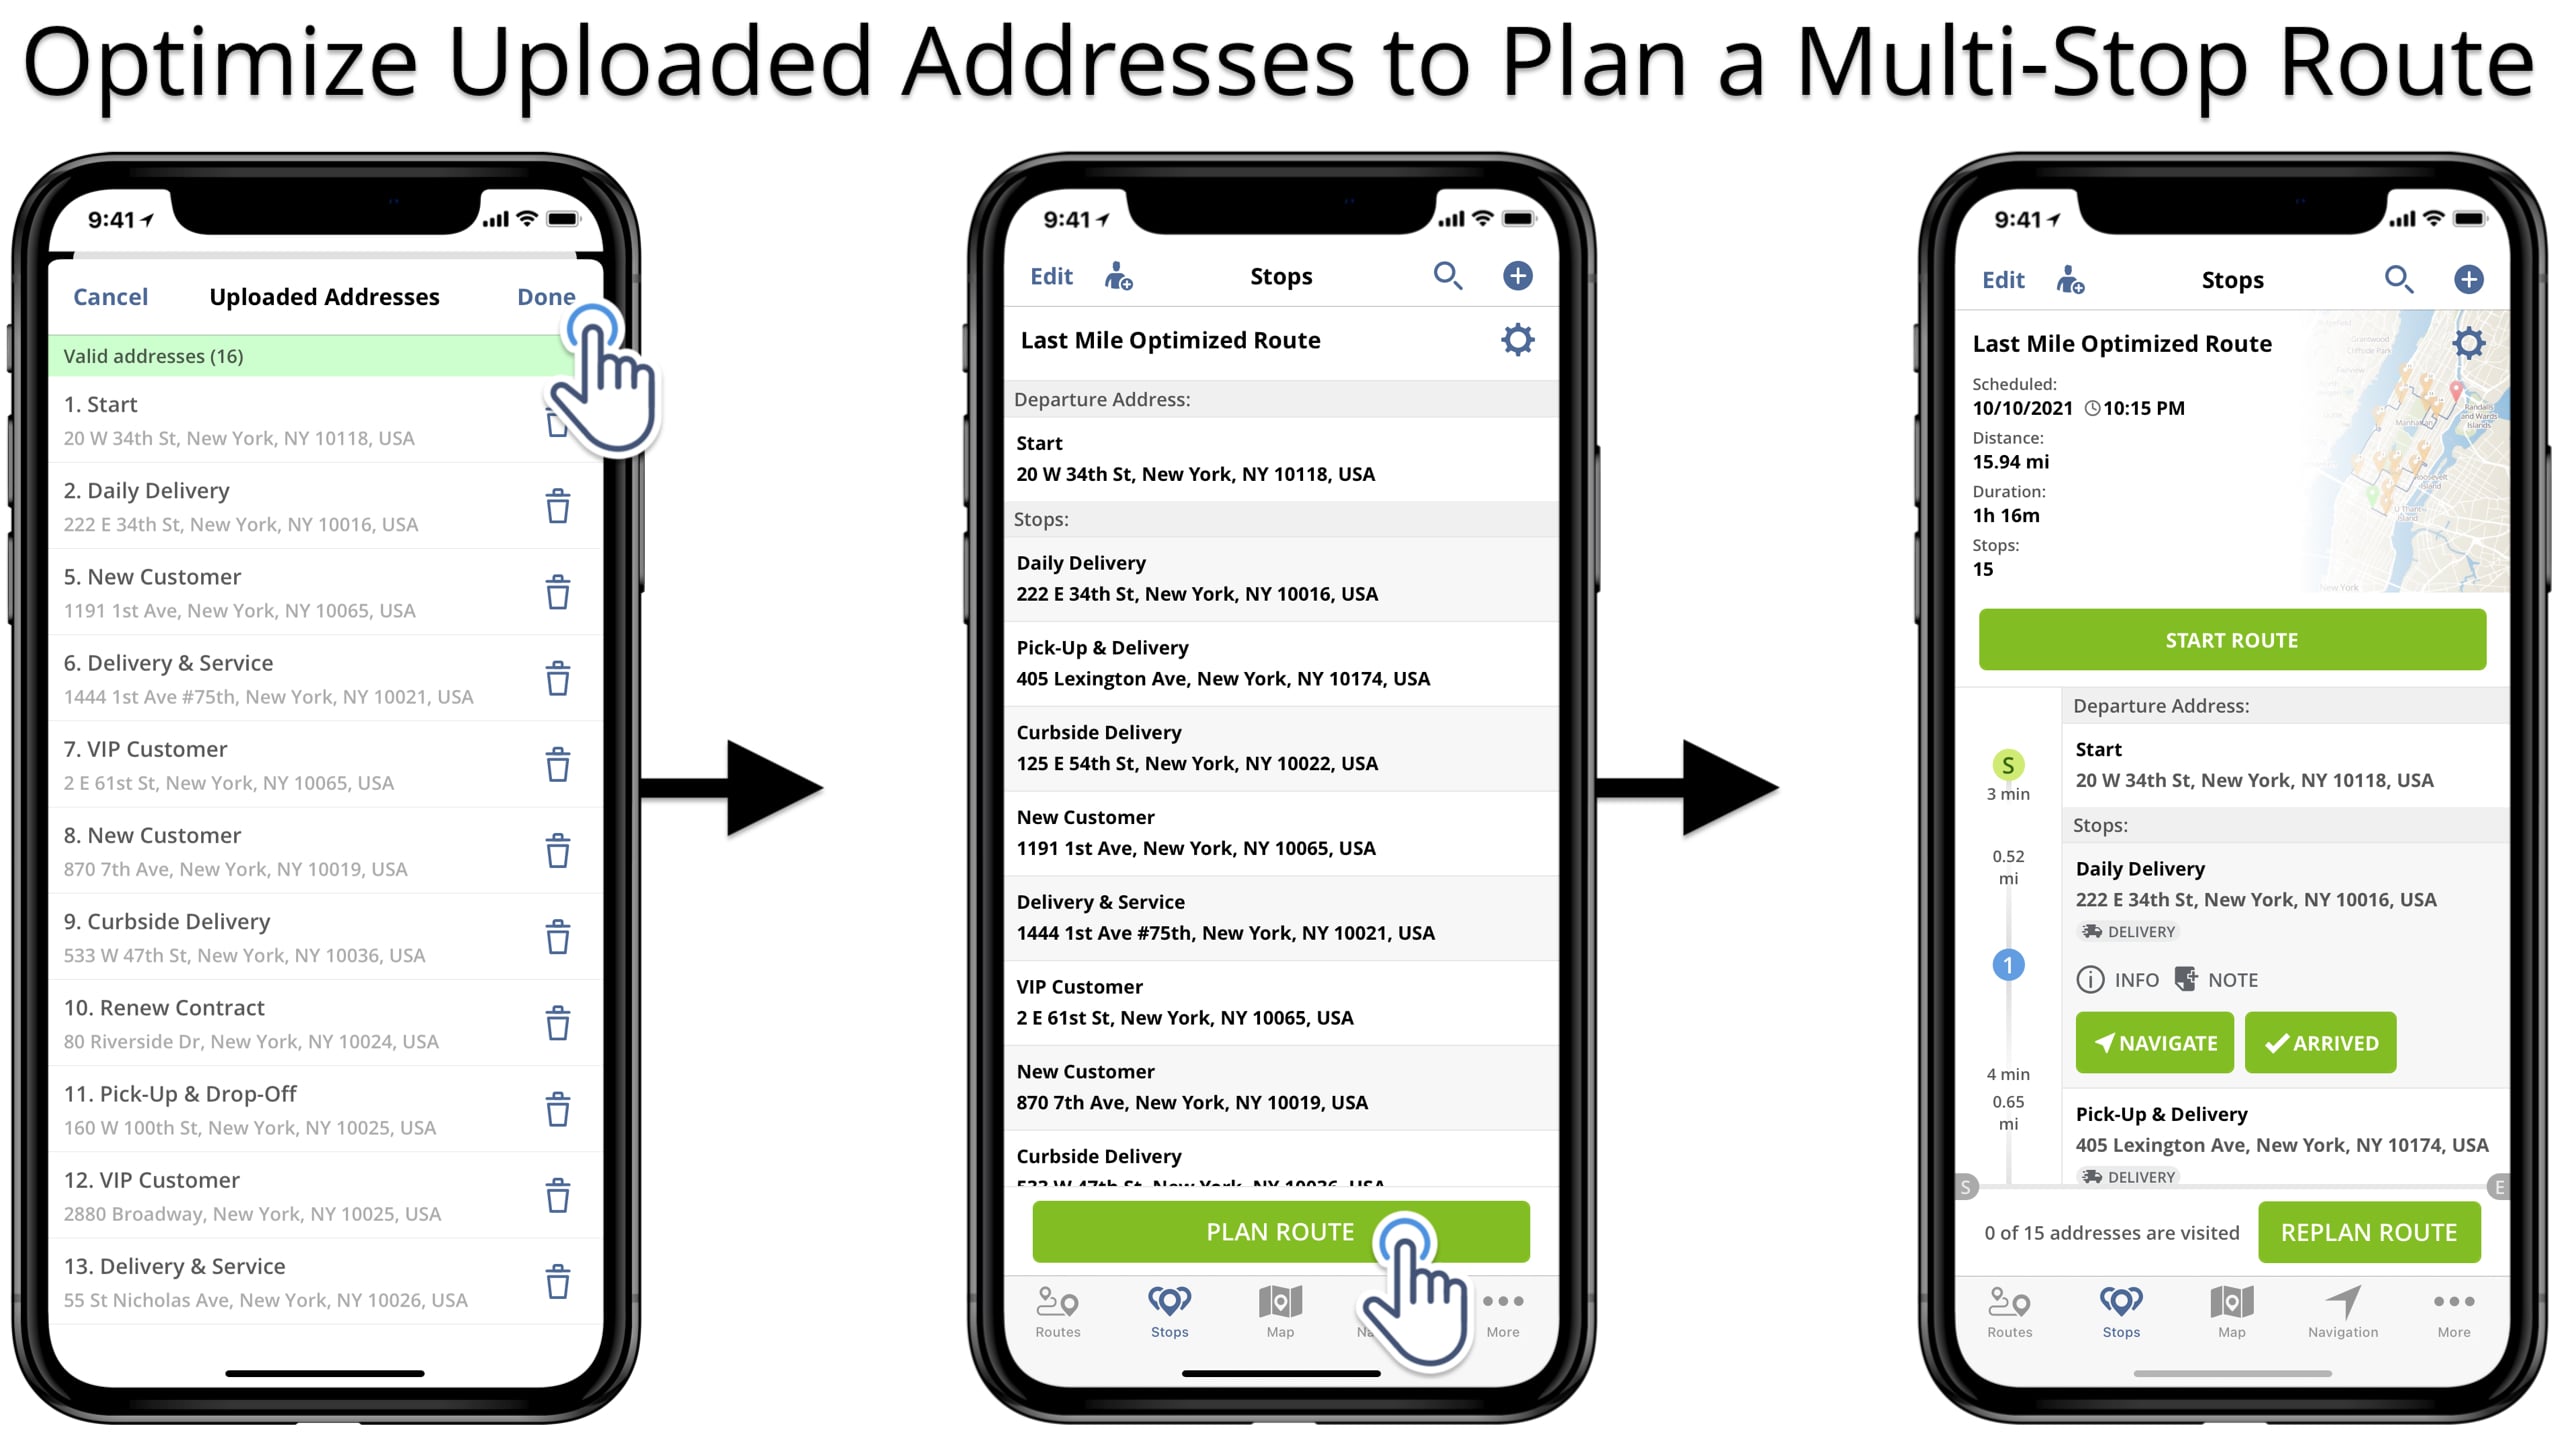 Upload route as CSV or XLSX file and optimize uploaded addresses on iOS route planner app.